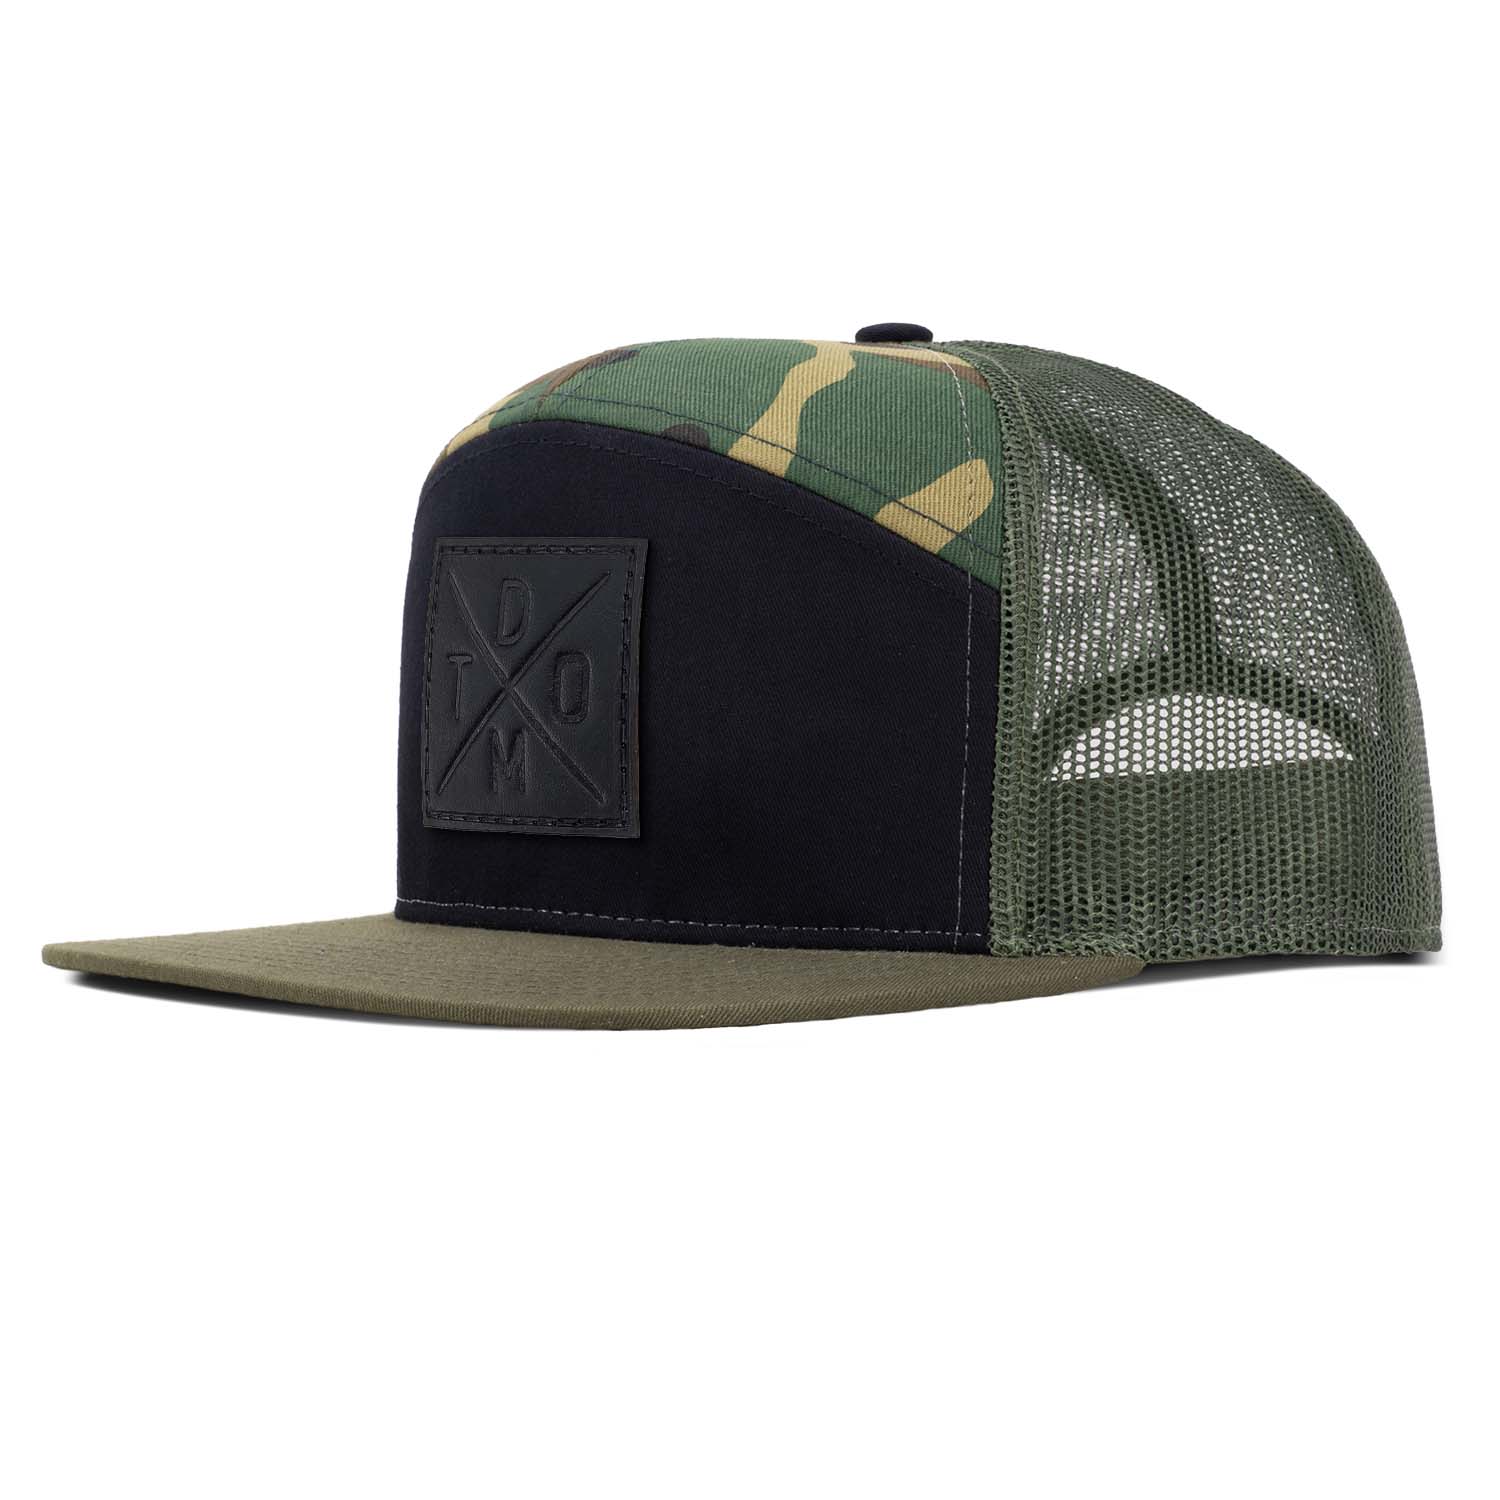 Revolution Mfg woodland camo and black with loden mesh with loden mesh 7 panel trucker featuring our black DTOM debossed full grain leather patch.